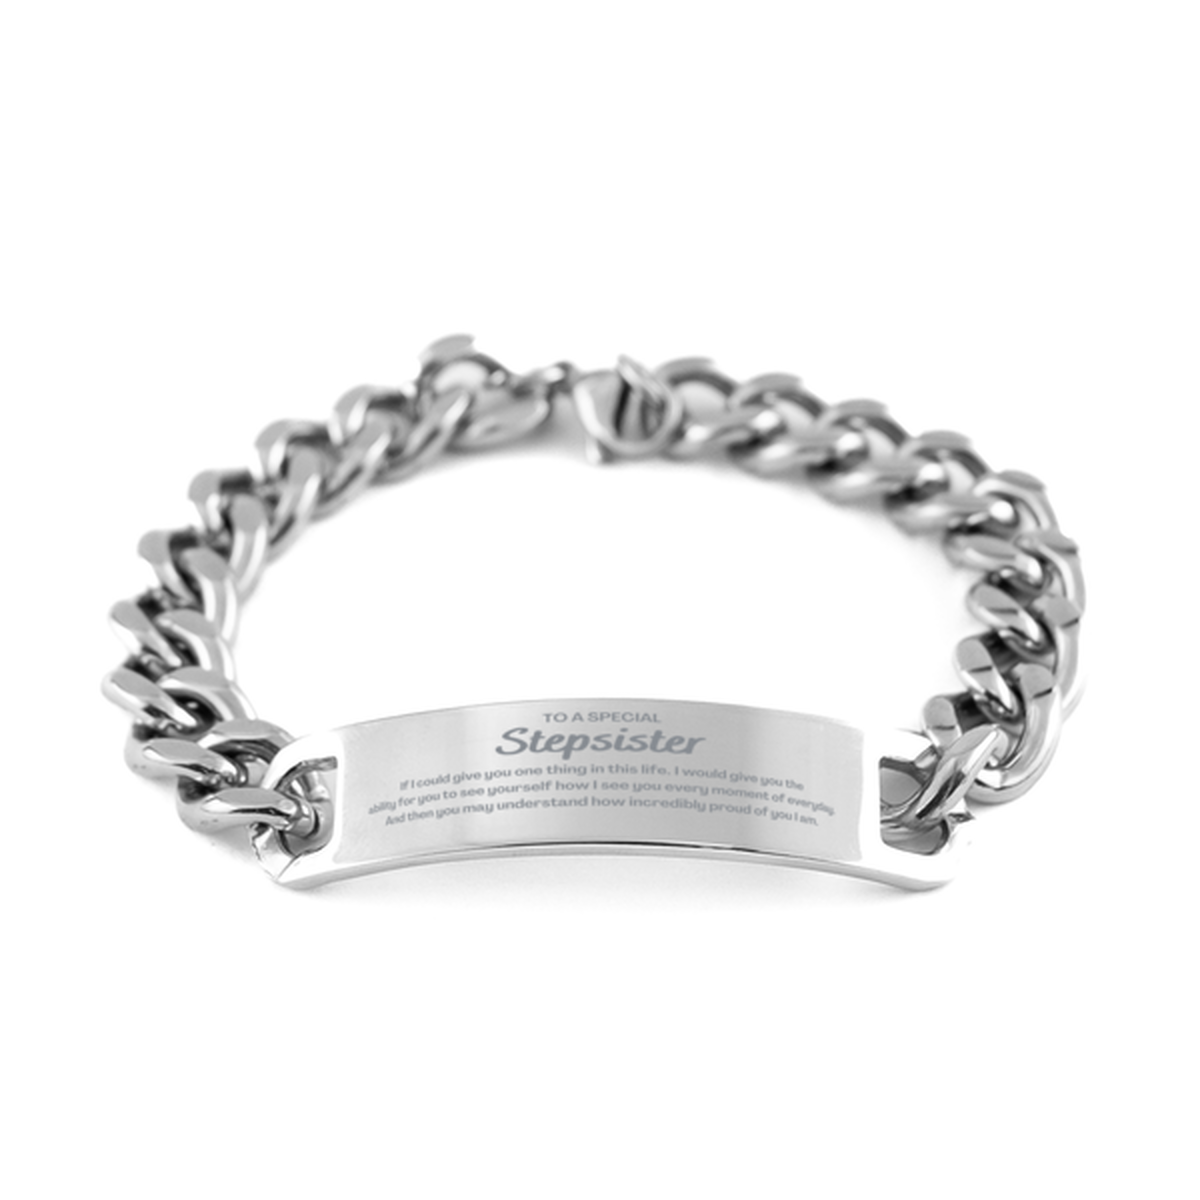 To My Stepsister Cuban Chain Stainless Steel Bracelet, Gifts For Stepsister Engraved, Inspirational Gifts for Christmas Birthday, Epic Gifts for Stepsister To A Special Stepsister how incredibly proud of you I am